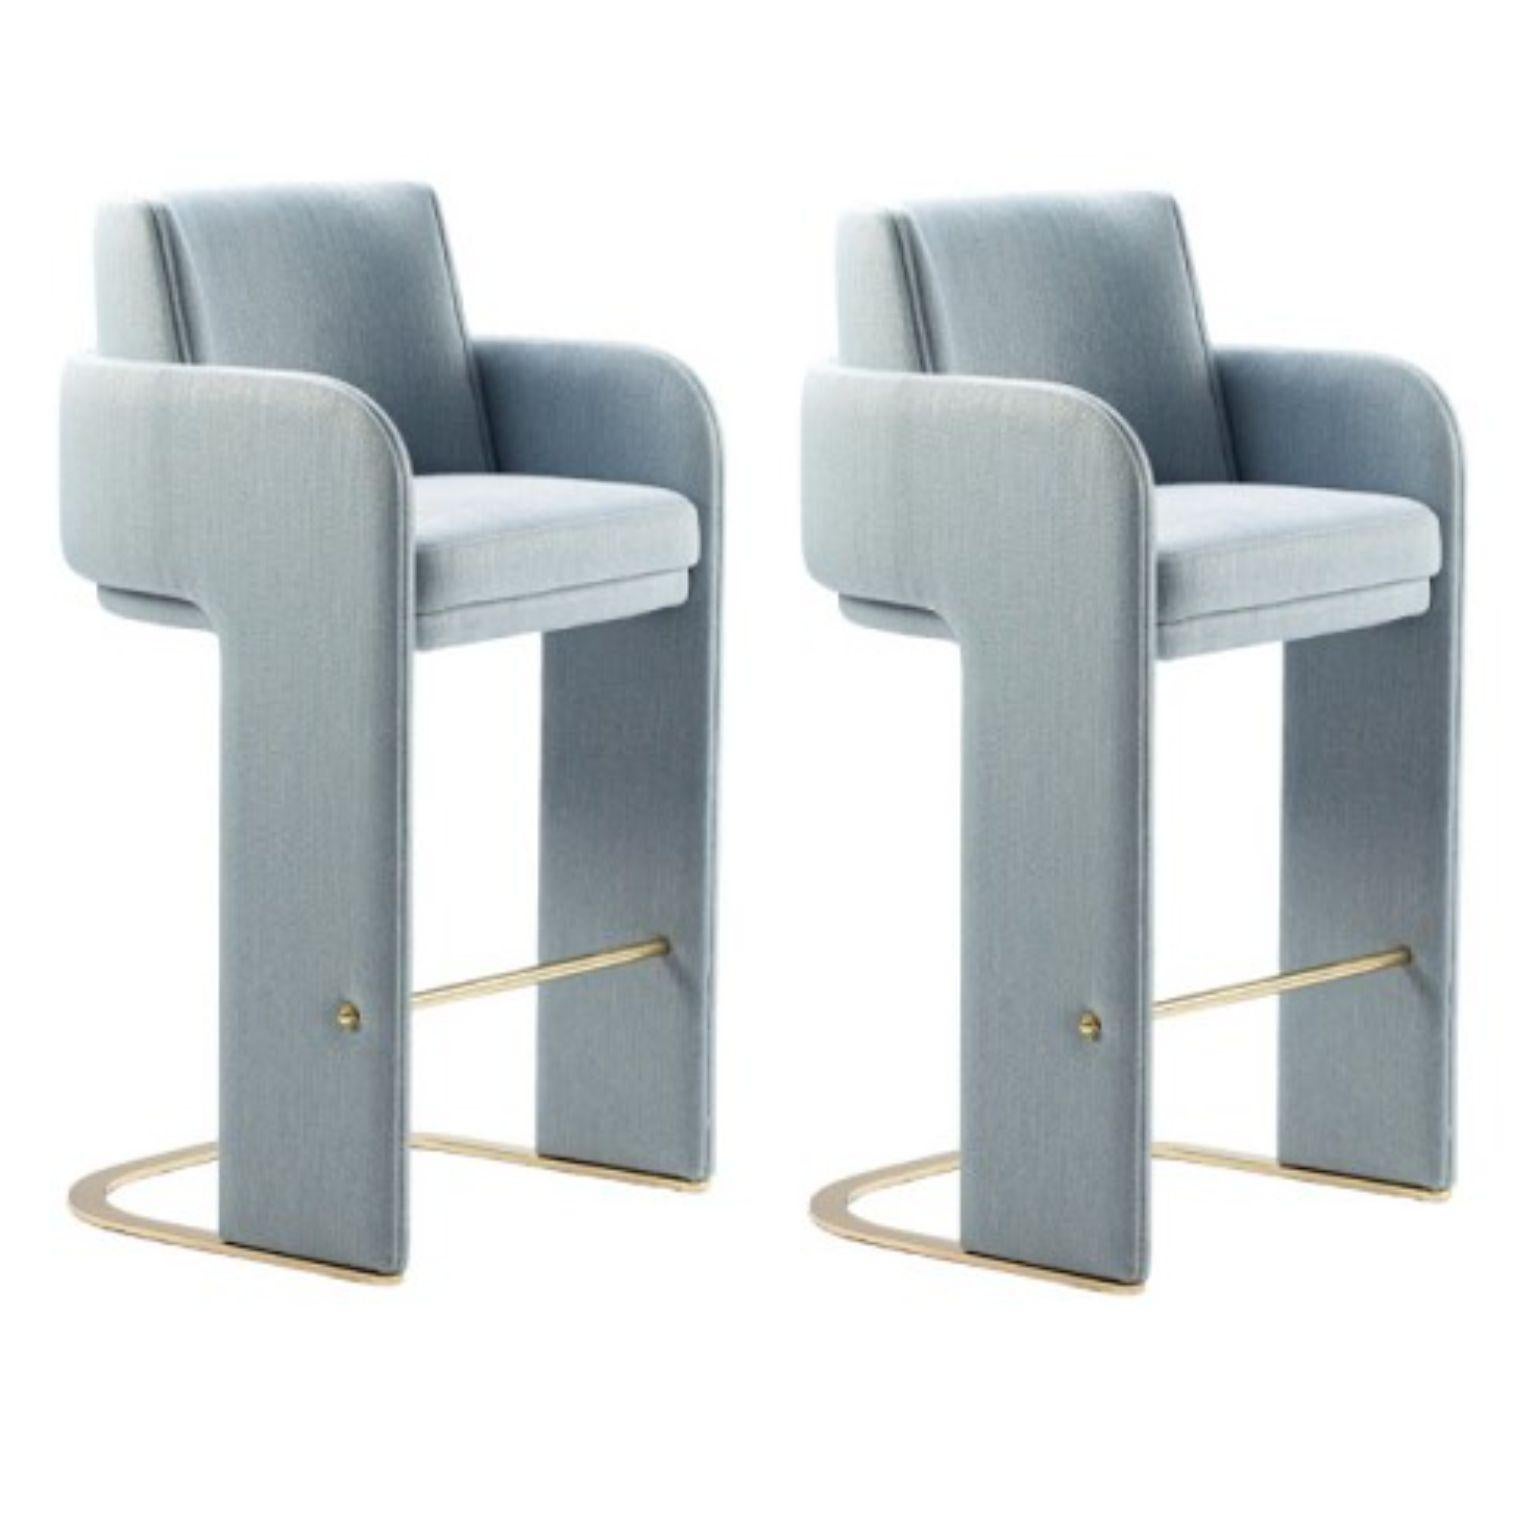 Odisseia bar chair by DooqSet of 2 Odisseia Bar Chairs by Dooq
Dimensions: W 56 x D 57 x H 105.5 cm
Materials: Polished brass, copper or nickel, or satin brass, leather or fabric

Odisseia chair embodies the aesthetic spirit of the space age, a